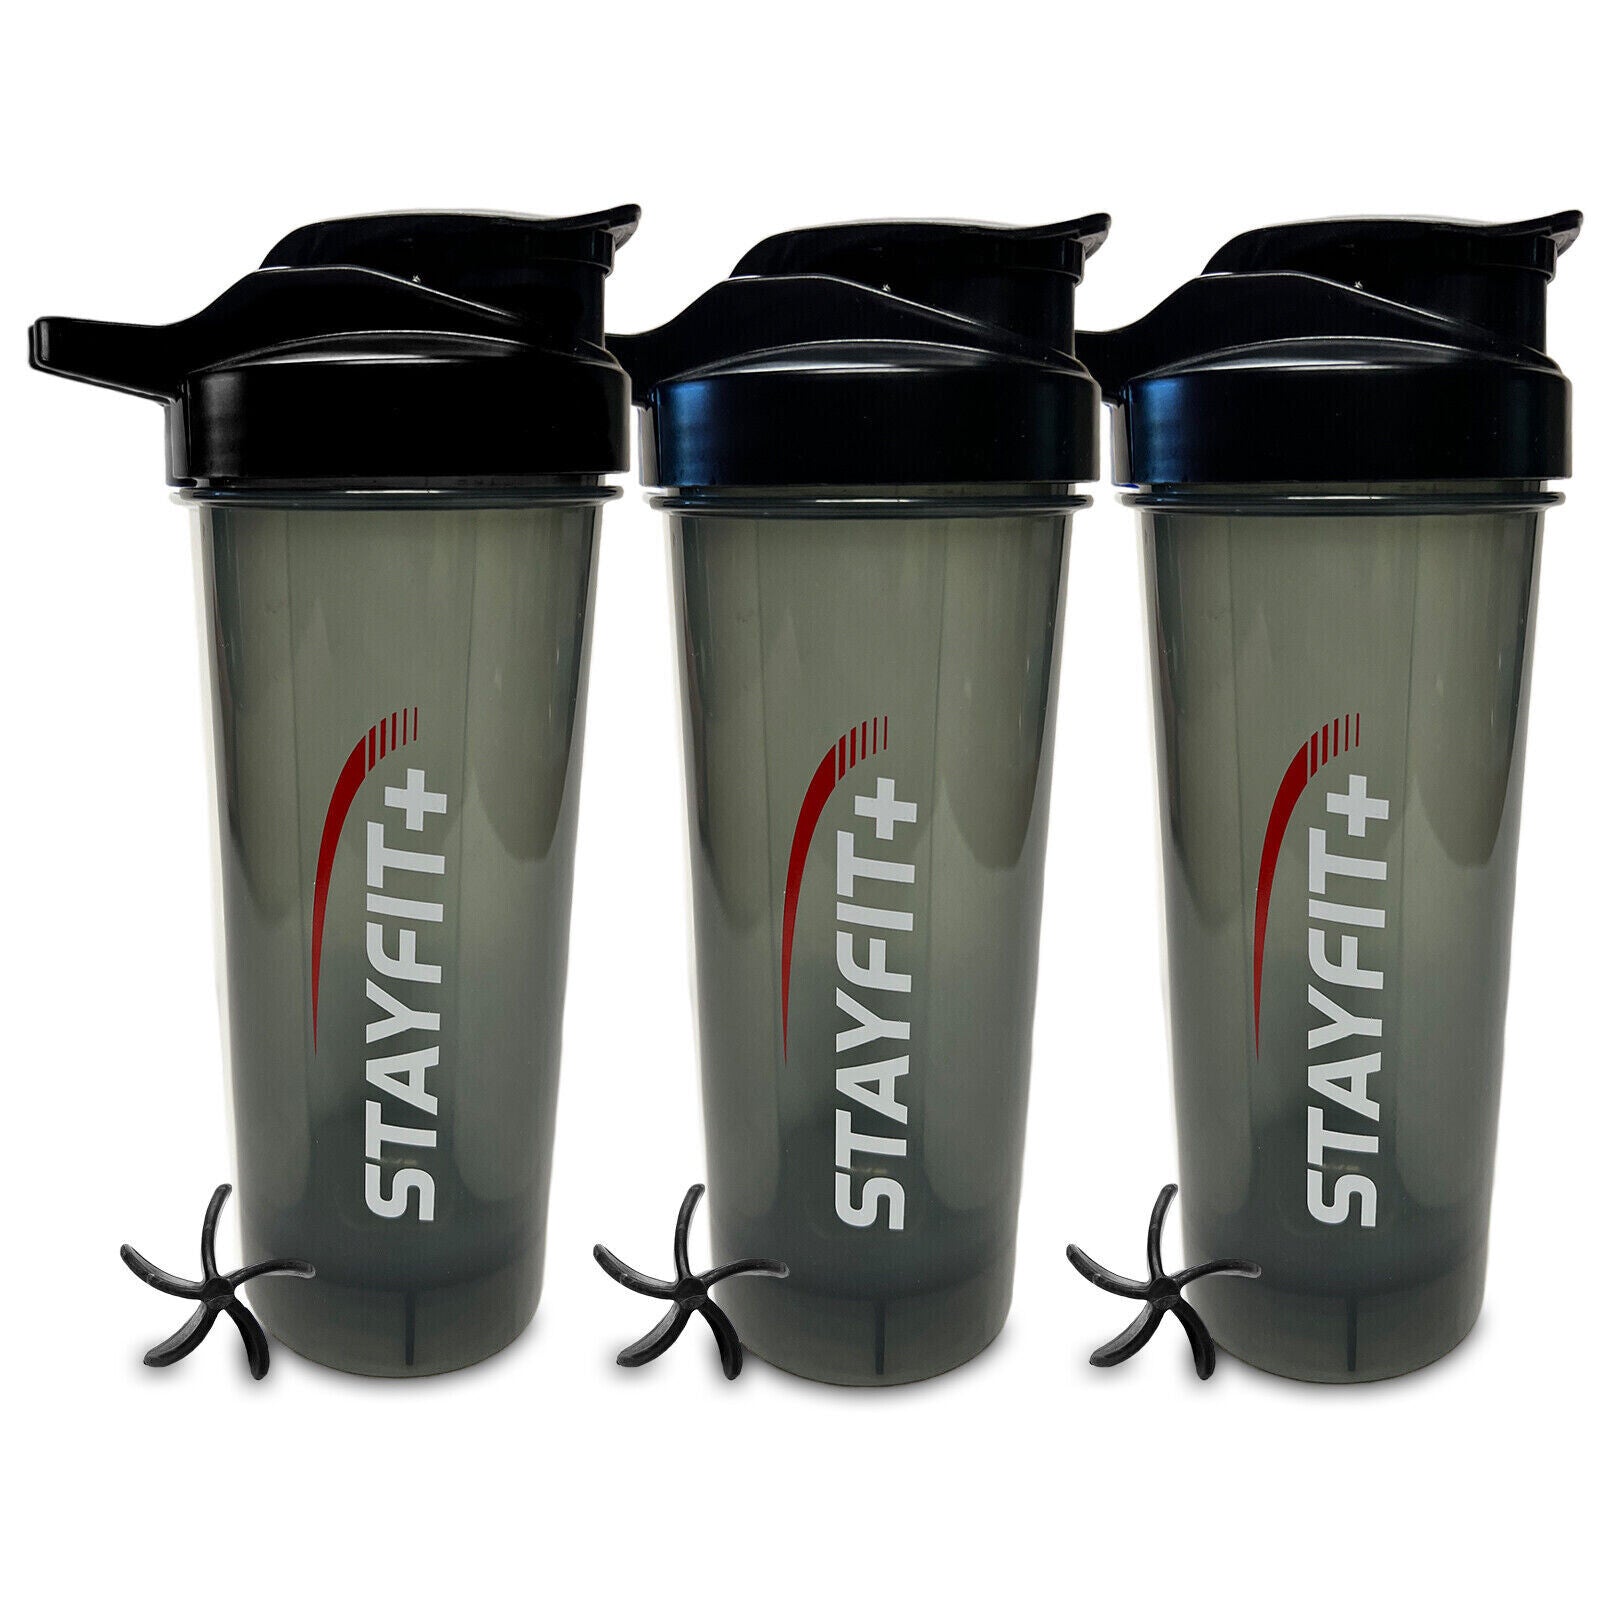 Stay Fit and Refreshed with a Protein Shake in this Classic Blender Bottle